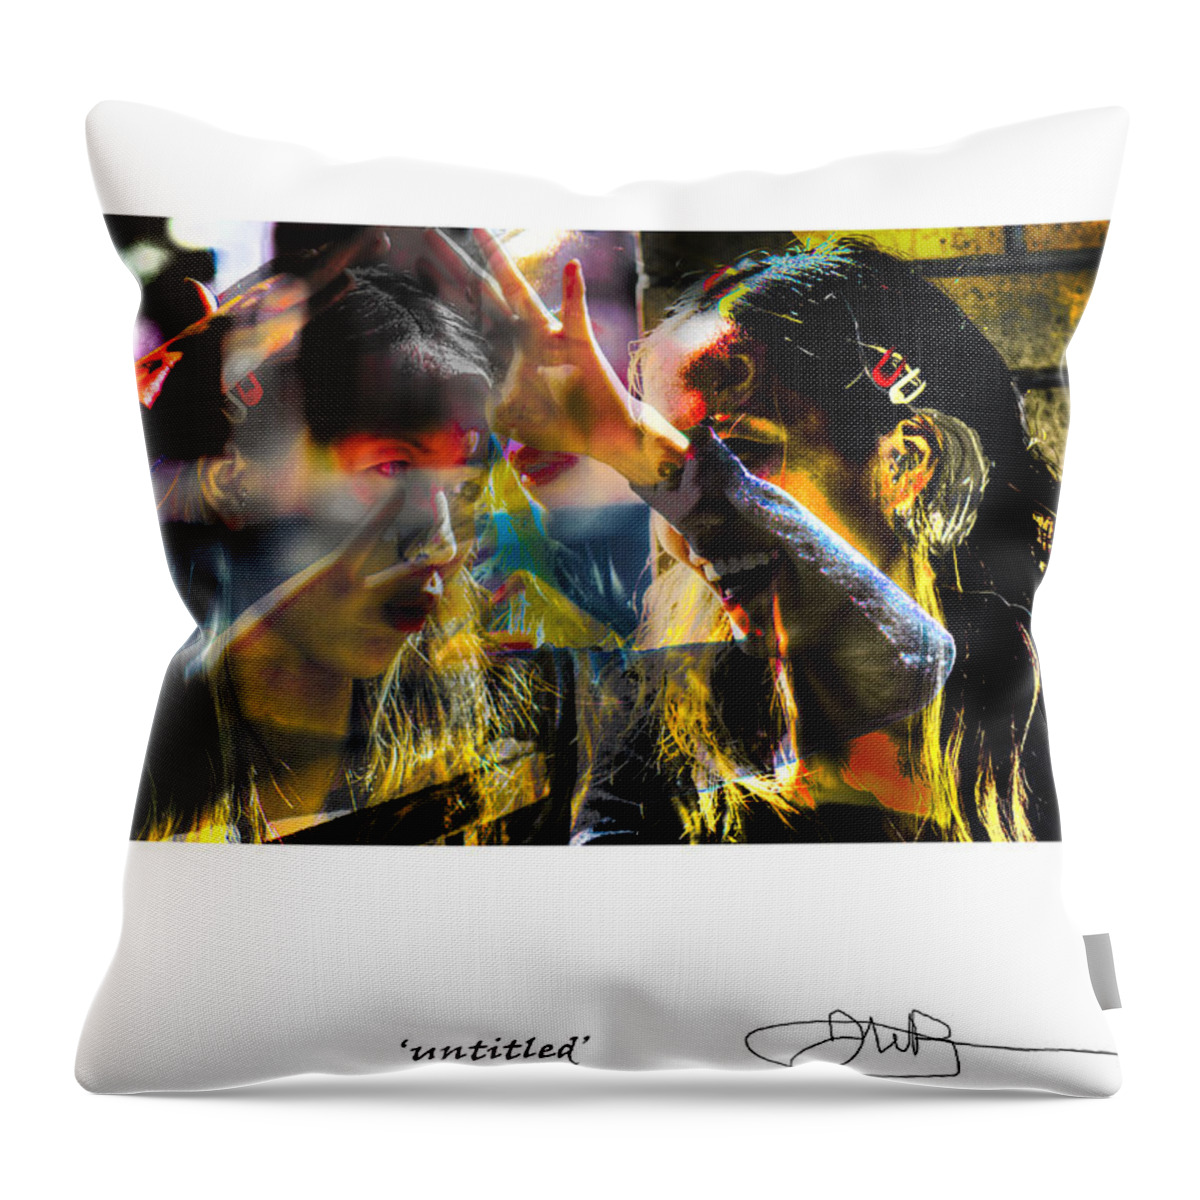 Signed Limited Edition Of 10 Throw Pillow featuring the digital art 35 by Jerald Blackstock